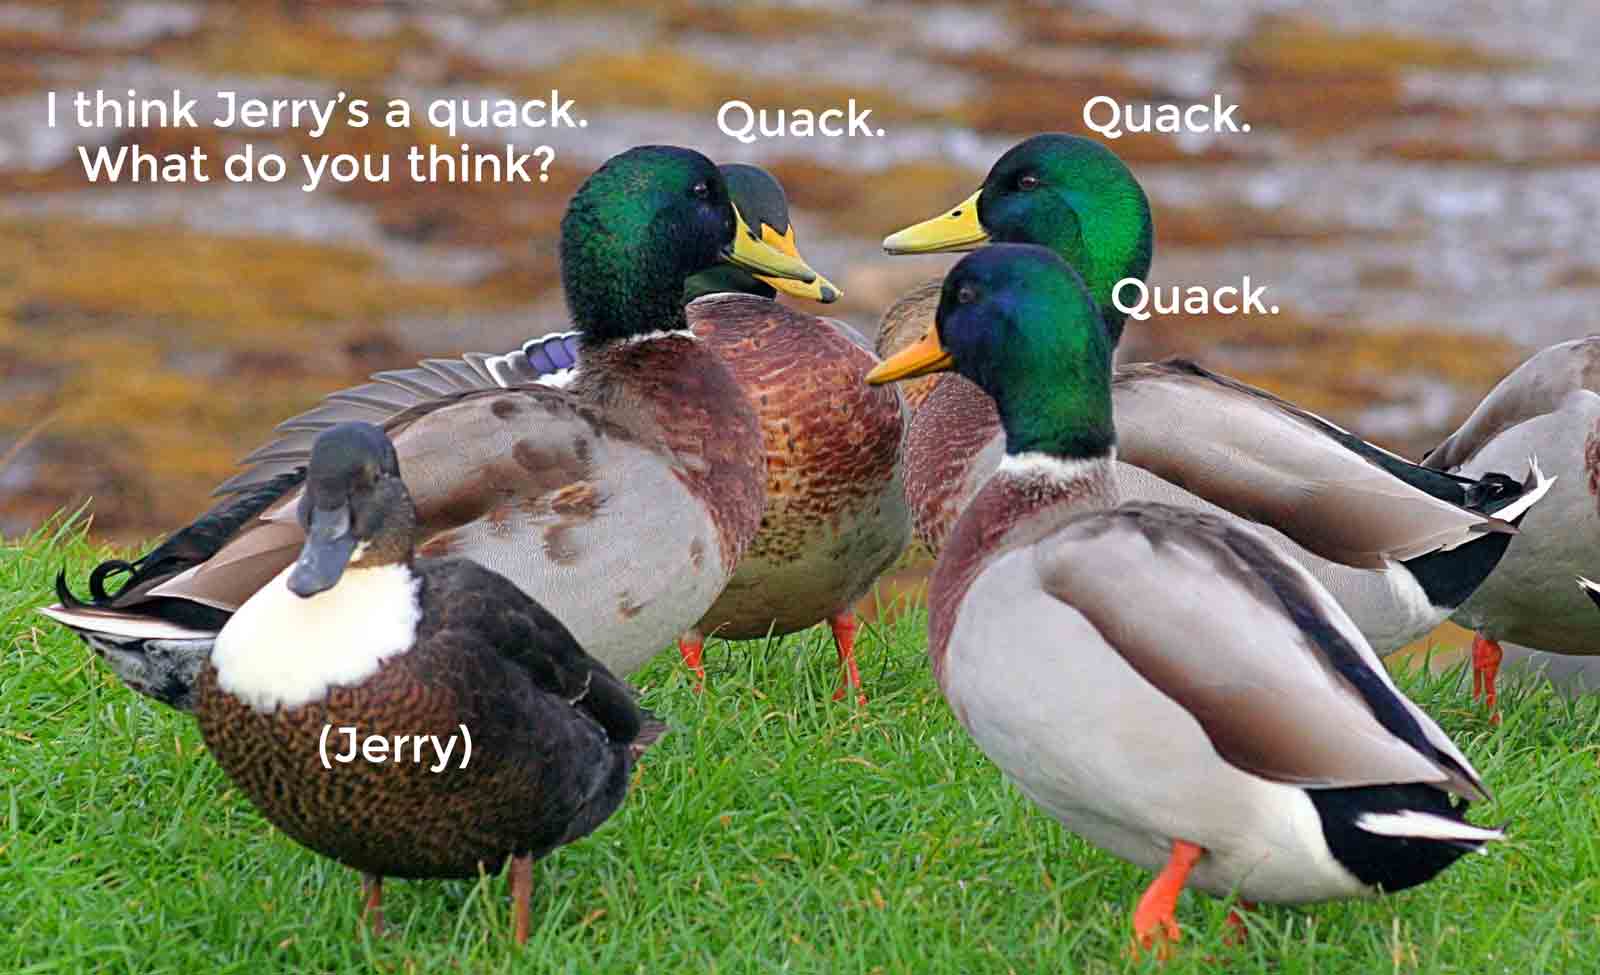 15-03-13-improve-customer-experience-with-communication-quack